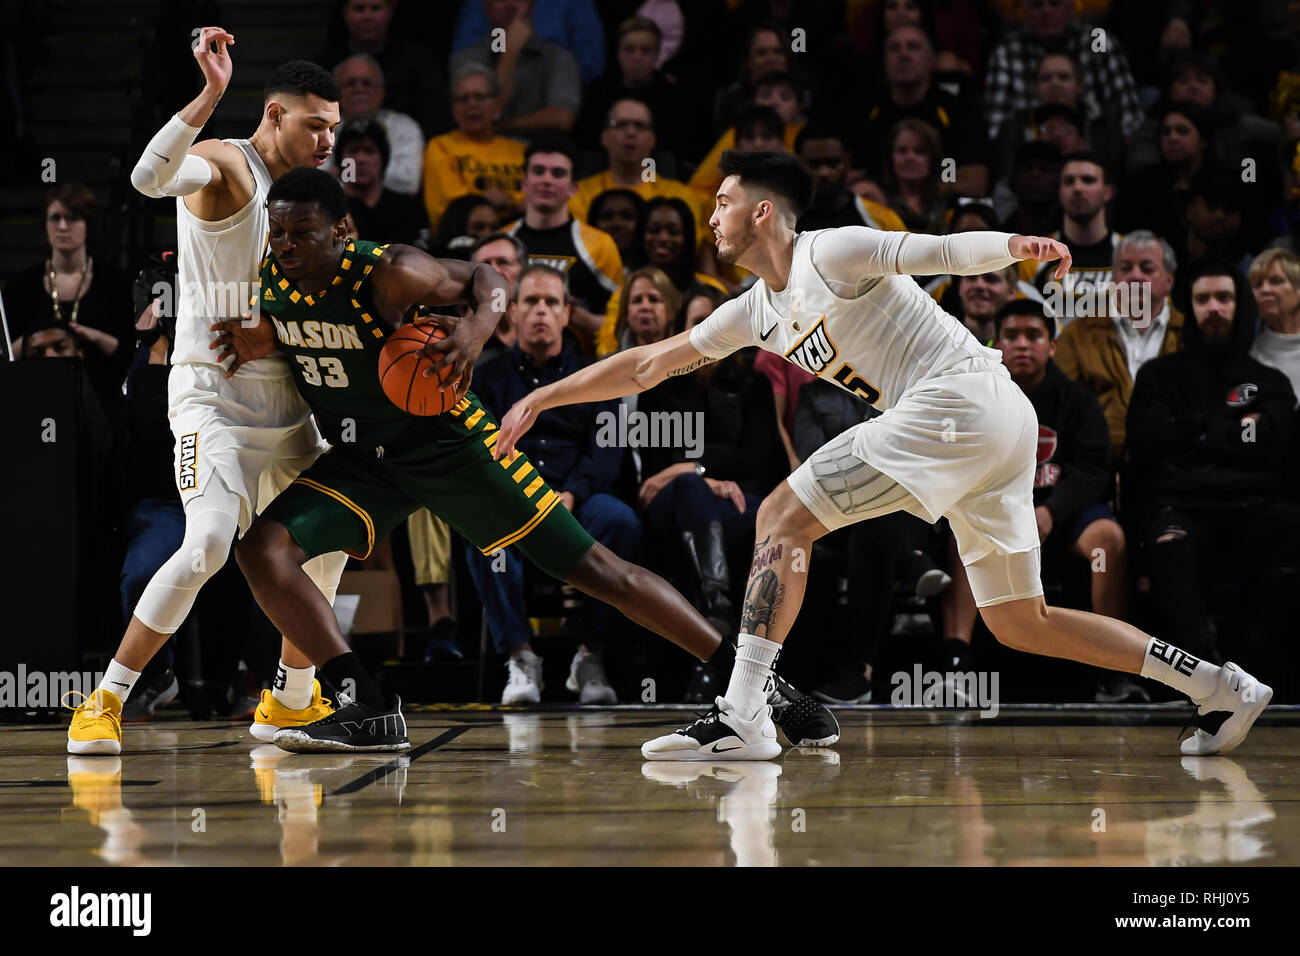 Richmond, Virginia, USA. 7th Jan, 2016. George Mason Forward GREG CALIXTE (33) drive toward the basket against MICHAEL GILMORE (22) and SEAN MOBLEY (5) during the game held at the Siegal Center Center in College Park, Maryland. Credit: Amy Sanderson/ZUMA Wire/Alamy Live News Stock Photo